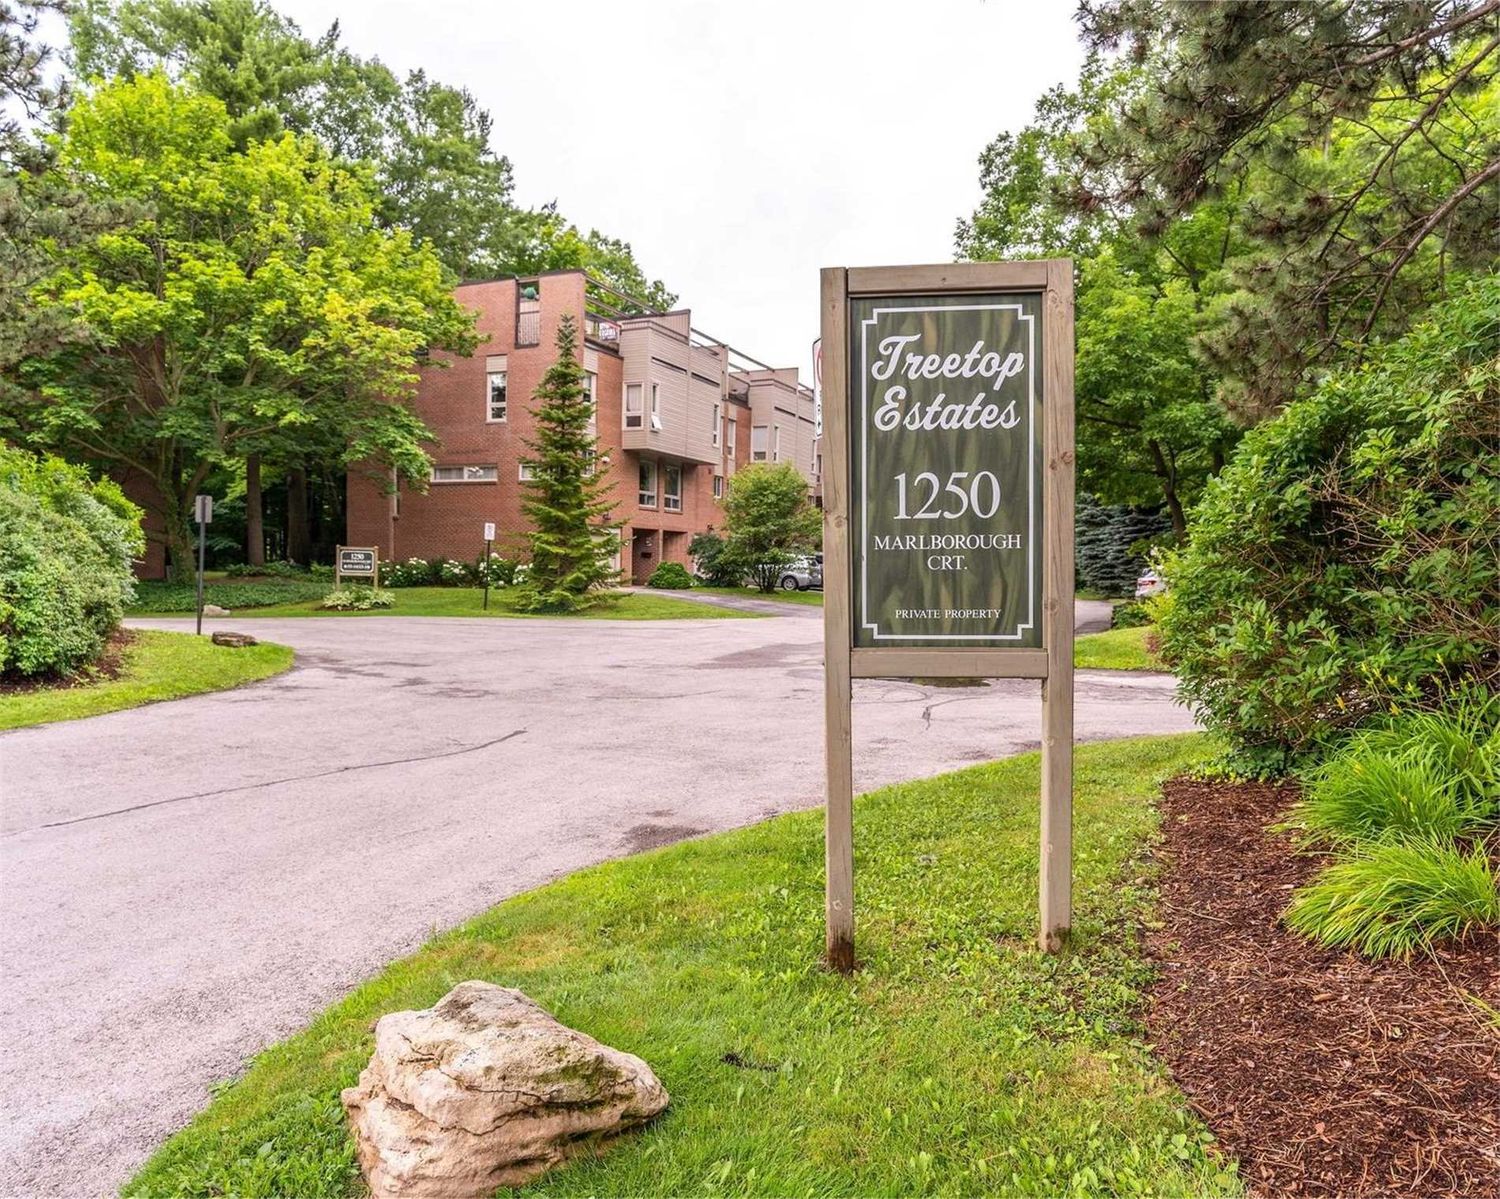 1250 Marlborough Court. Treetop Estates Townhomes is located in  Oakville, Toronto - image #2 of 2